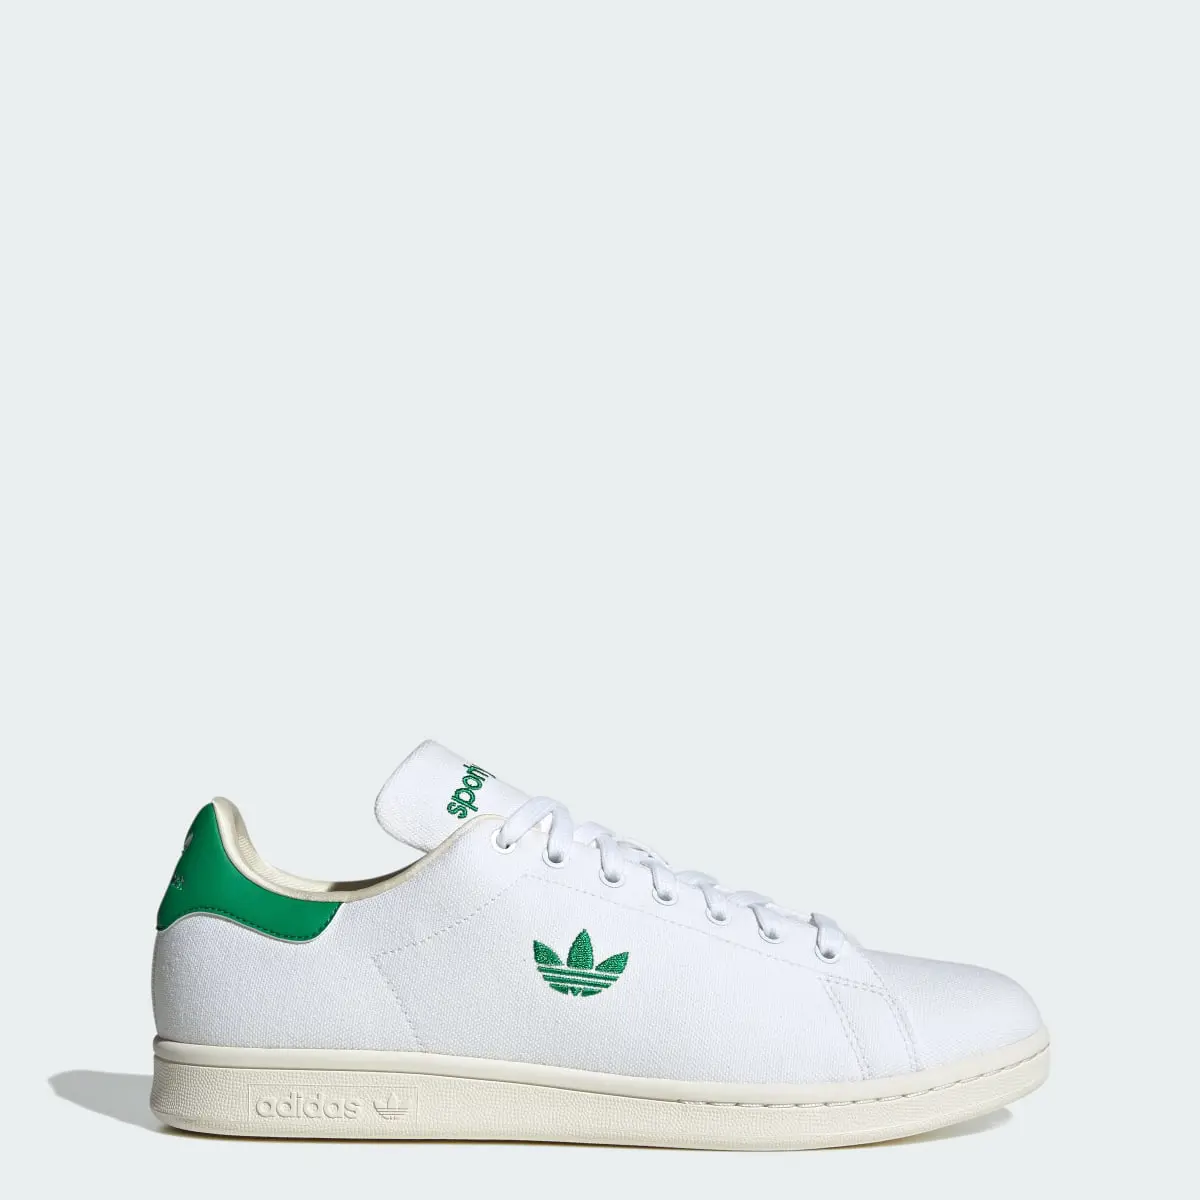 Adidas Stan Smith Sporty & Rich Shoes. 1